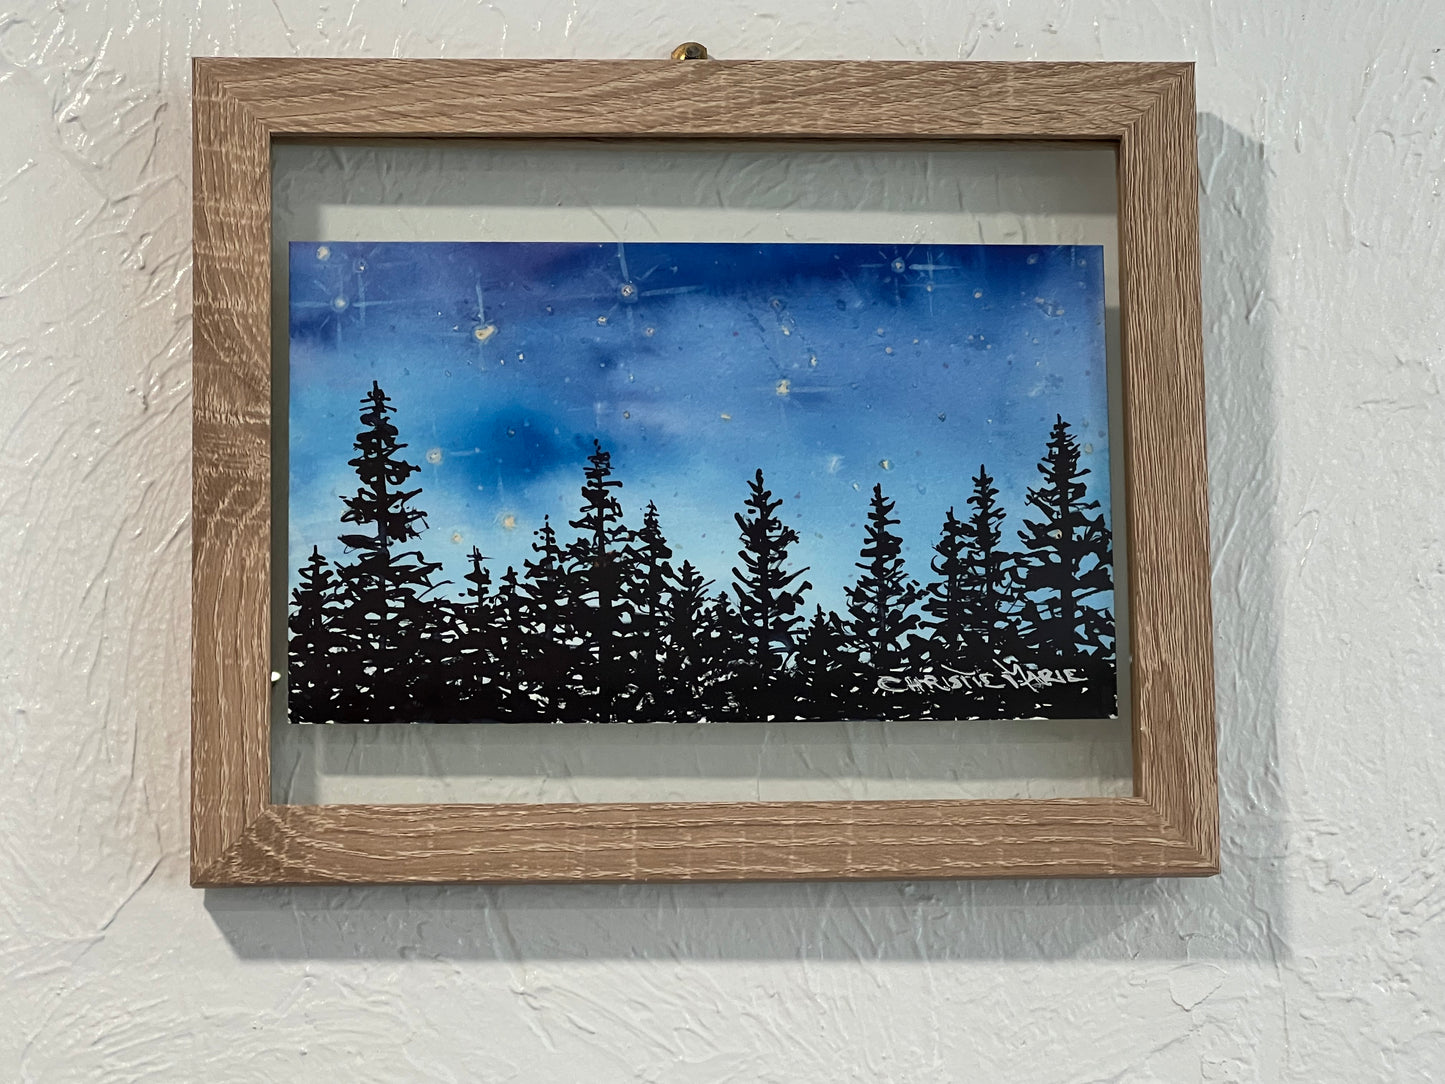 Framed Original Watercolor Art - "Fading Blues" Alpine Forest Night Stars in horizonal fade of blues by Christie Marie